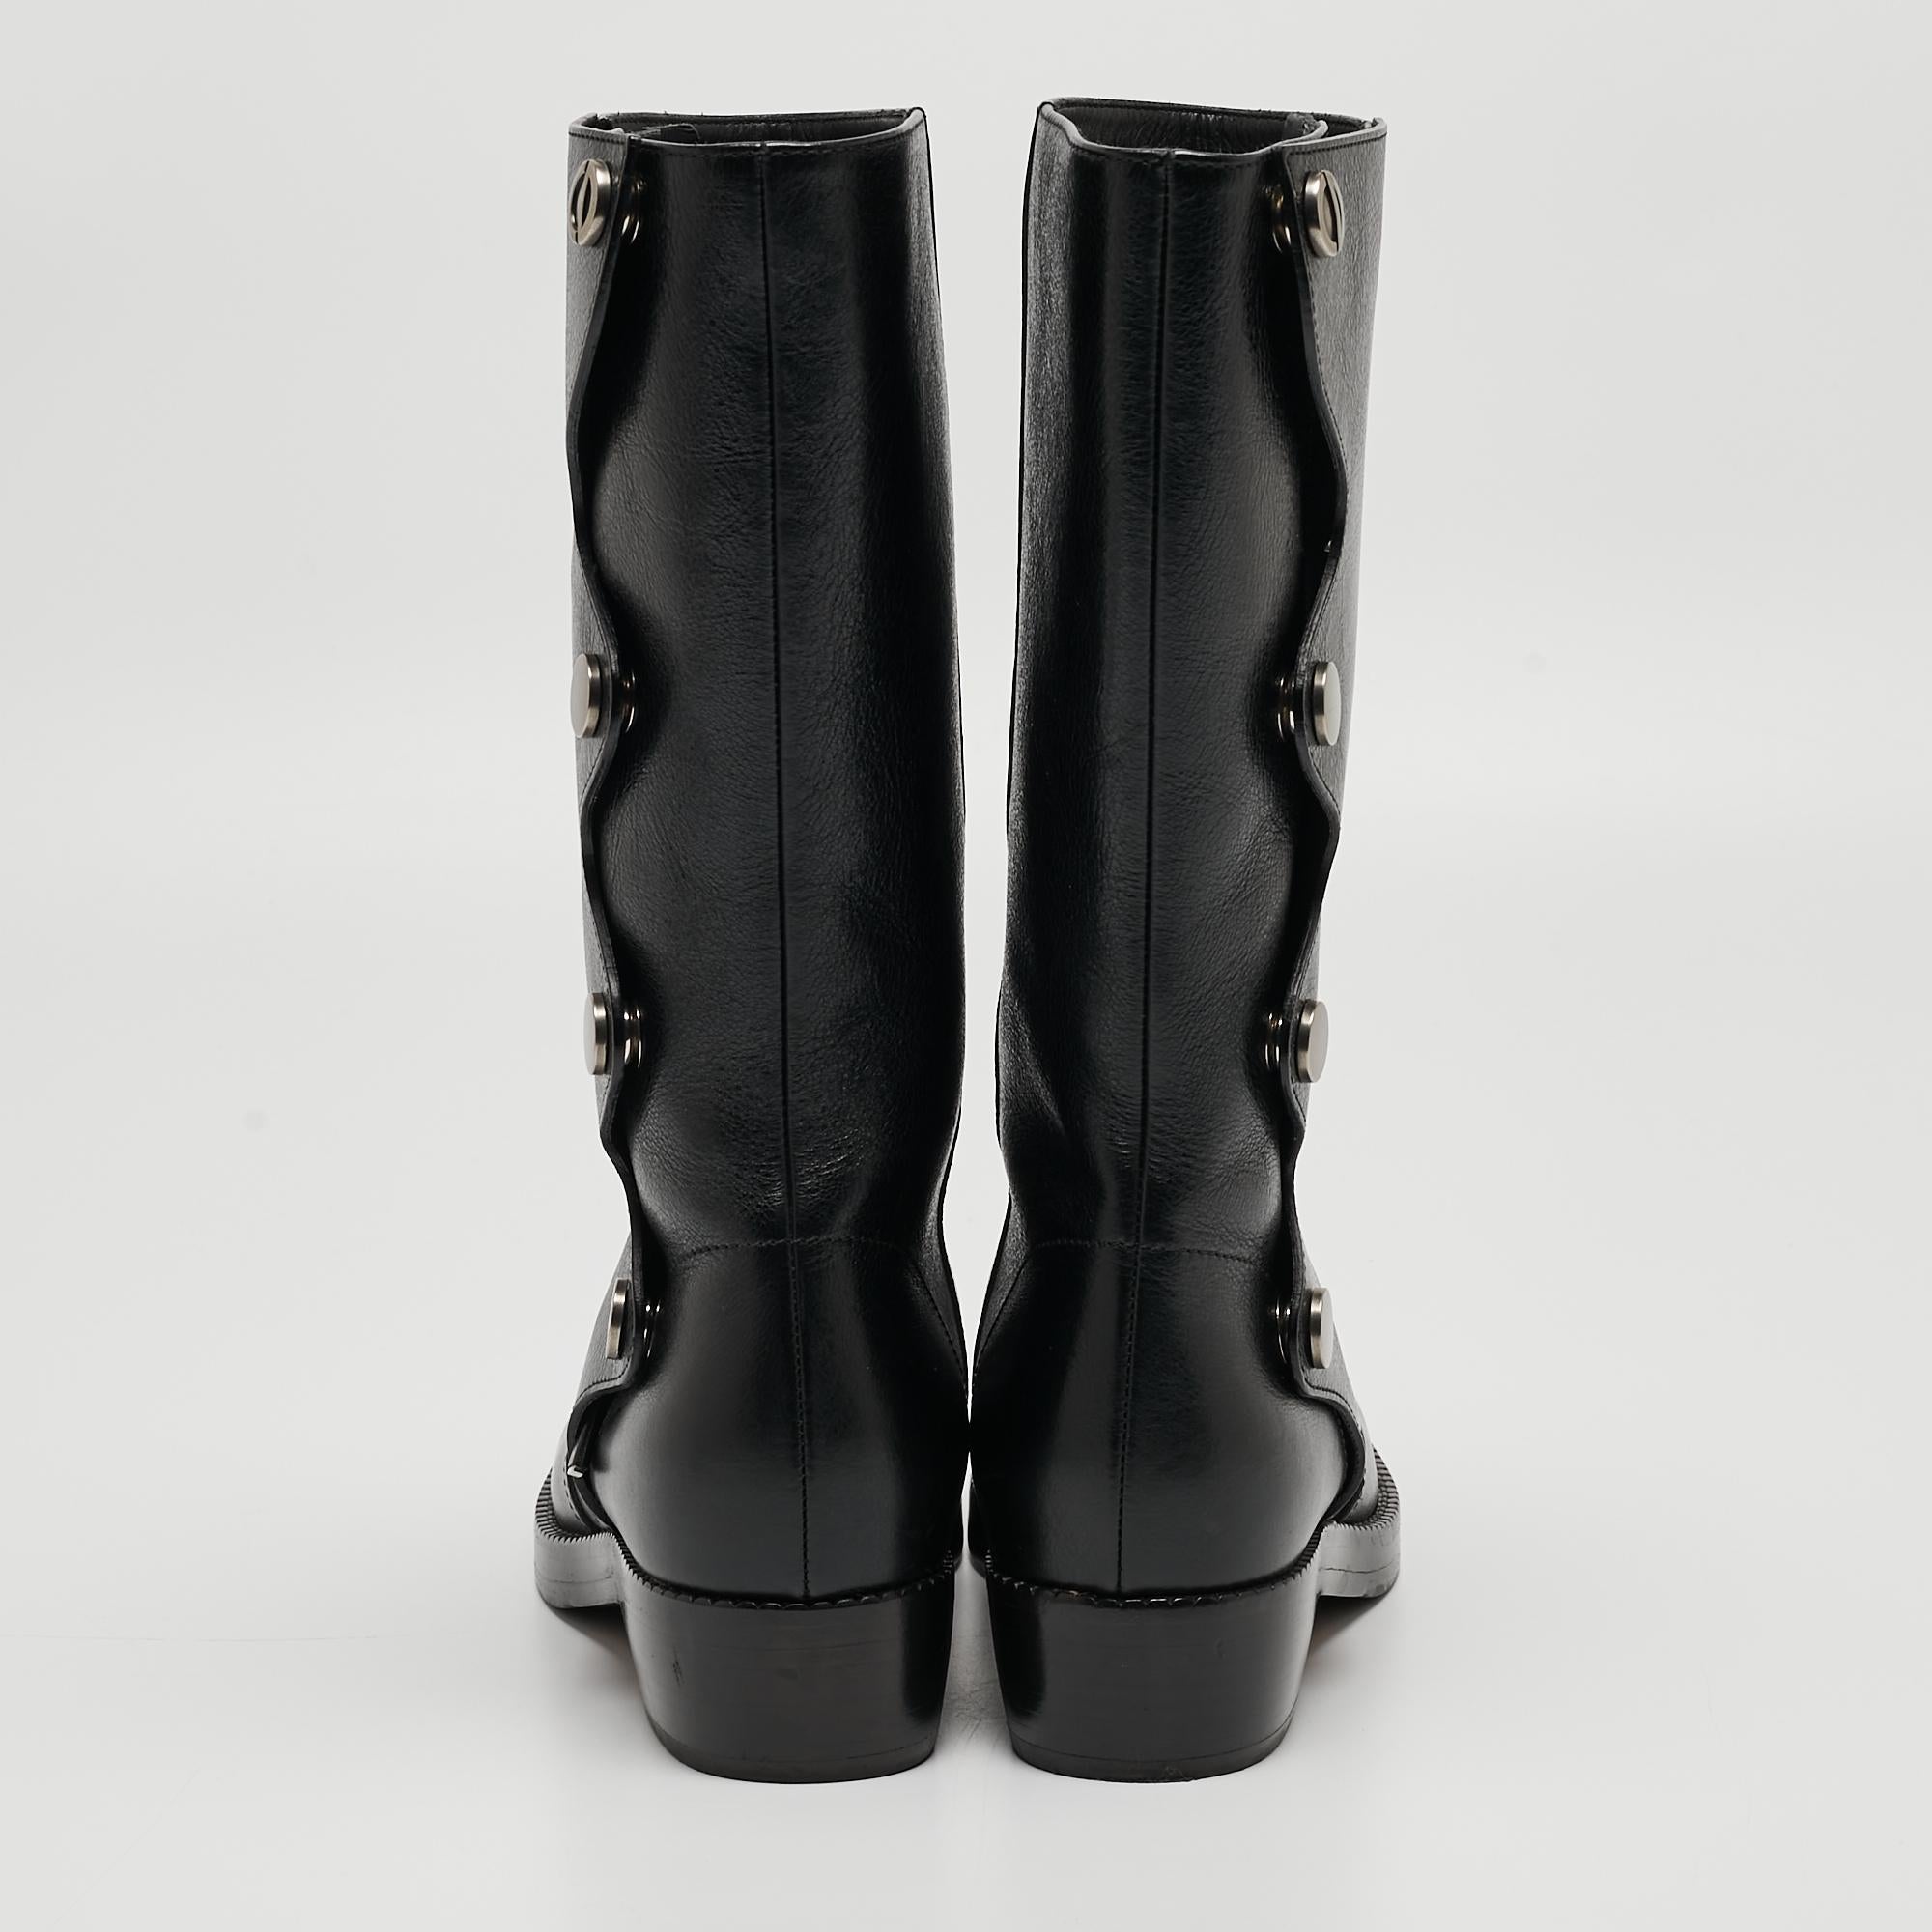 Enjoy the most fashionable days with these Dior Moto boots. Modern in design and craftsmanship, they are fashioned to keep you comfortable and chic!

Includes: Original Dustbag